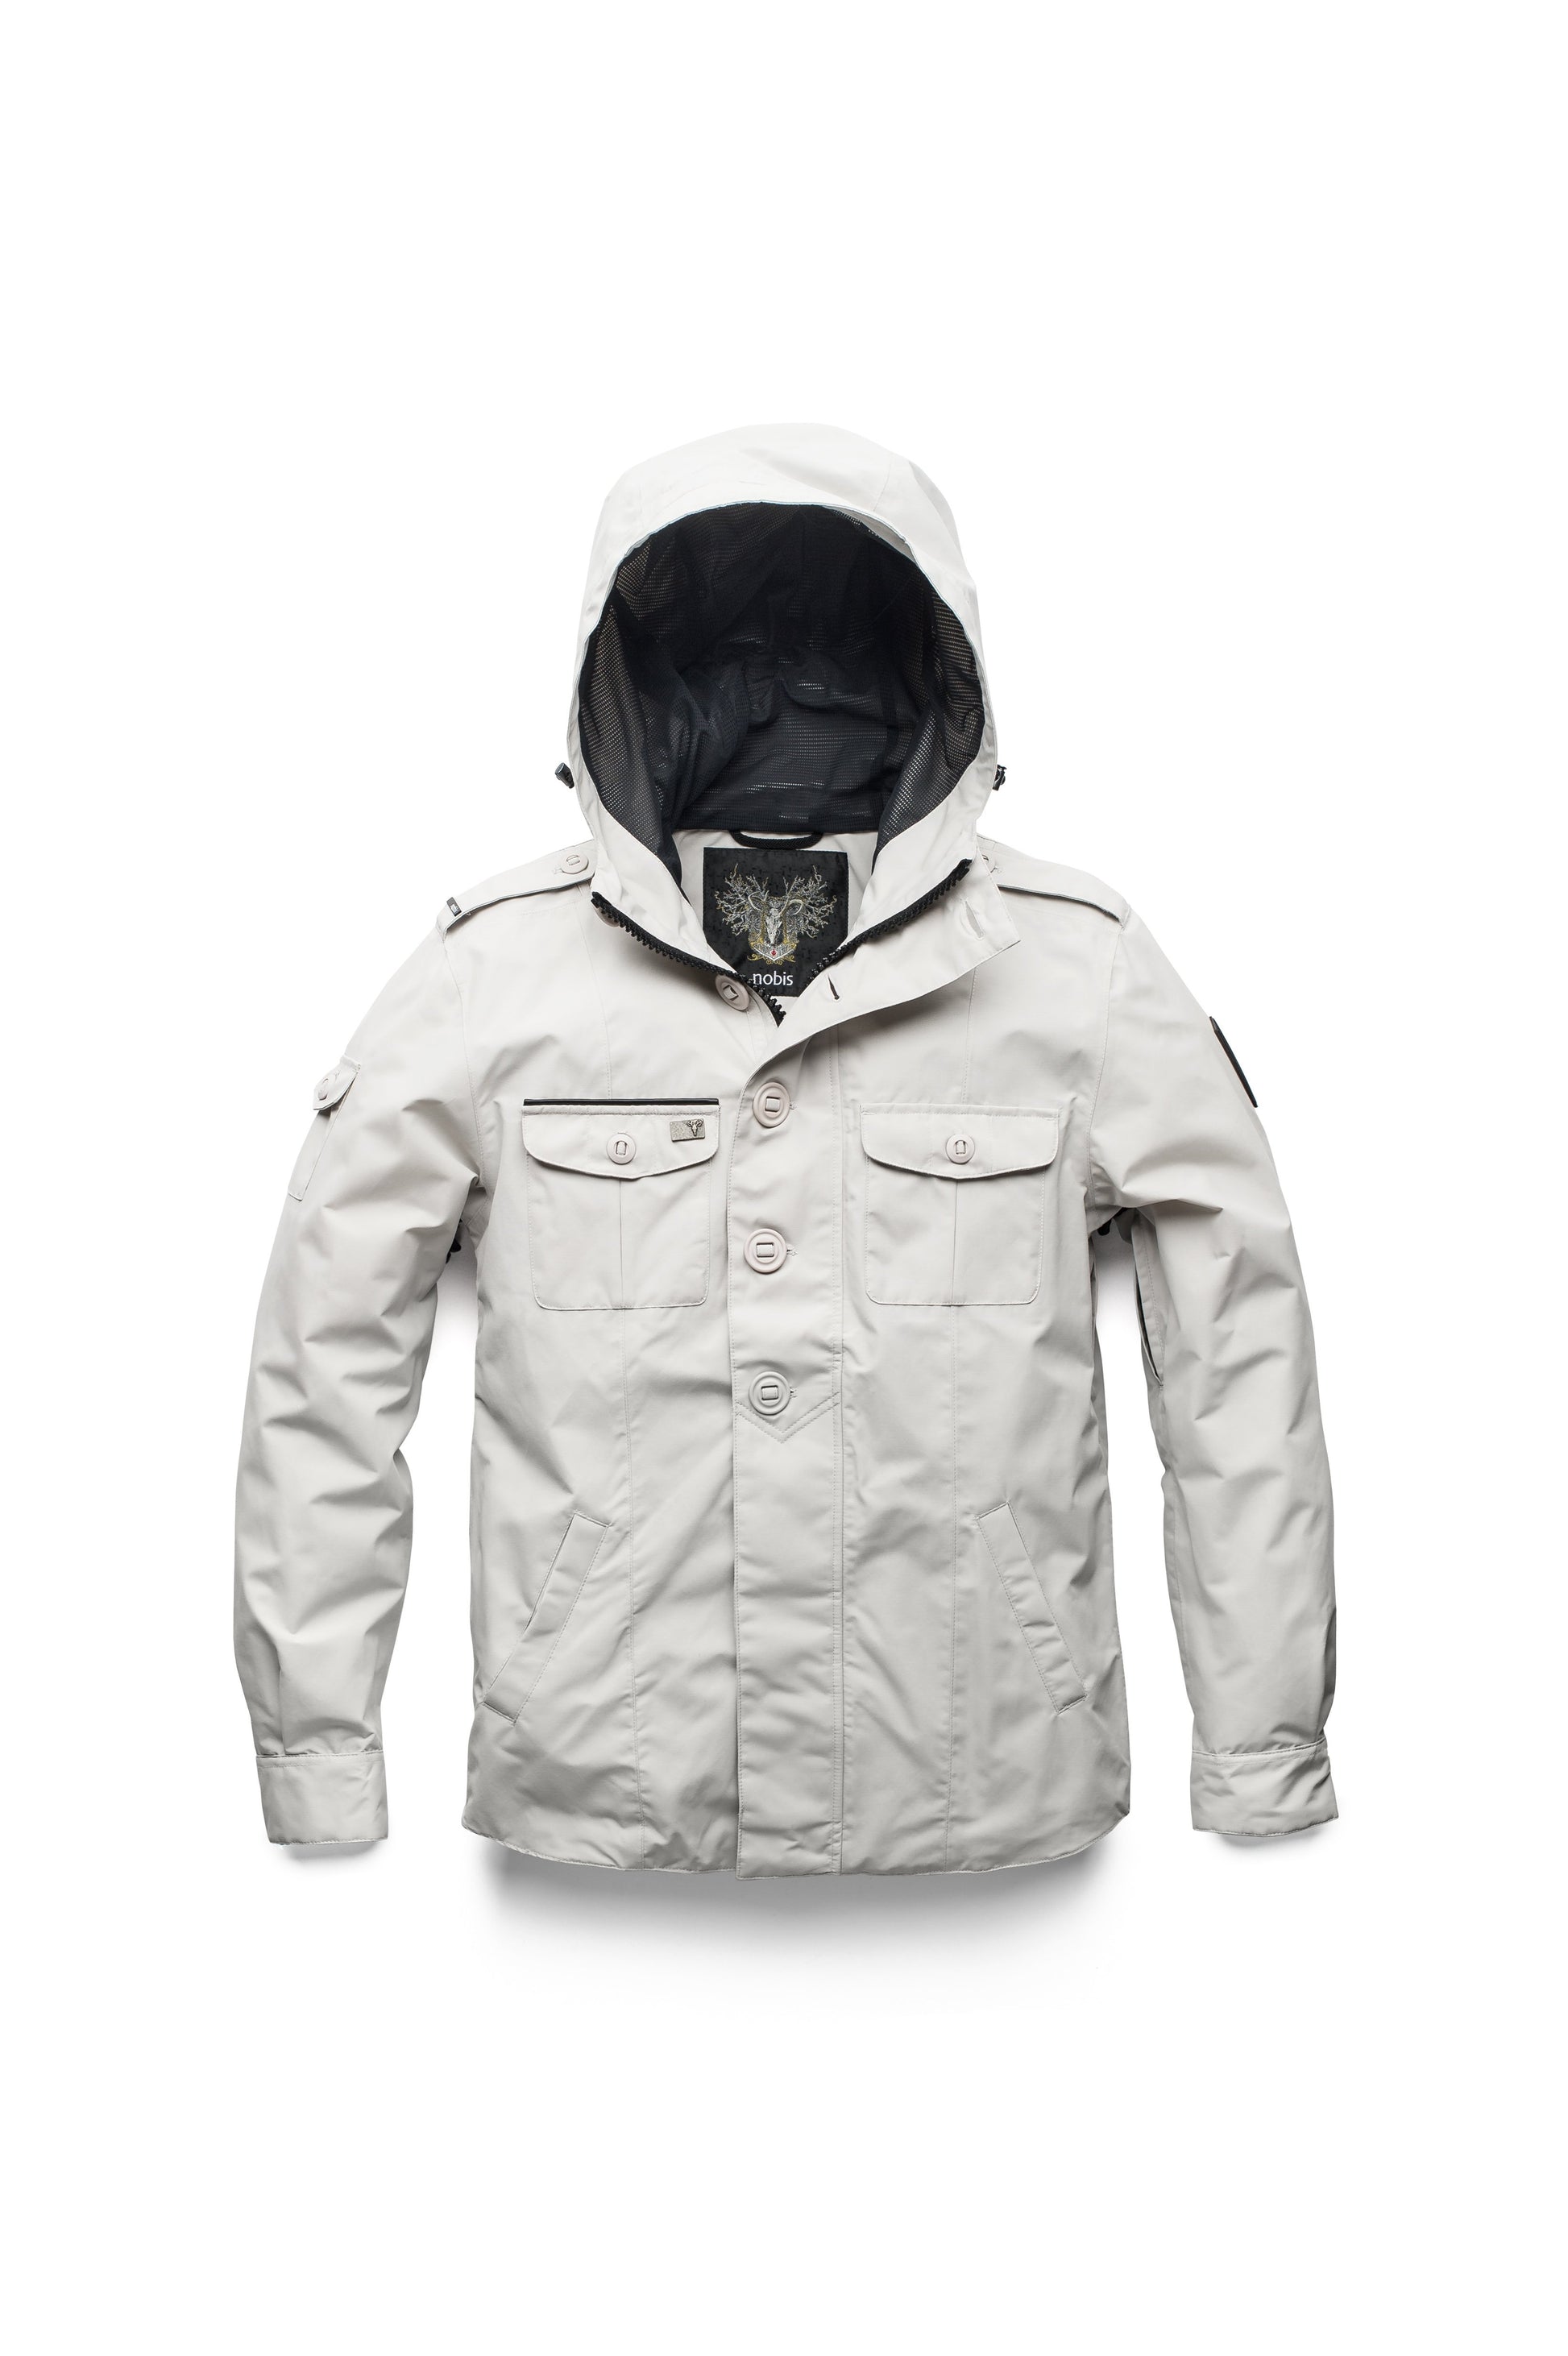 Men's hooded shirt jacket with patch chest pockets in Light Grey